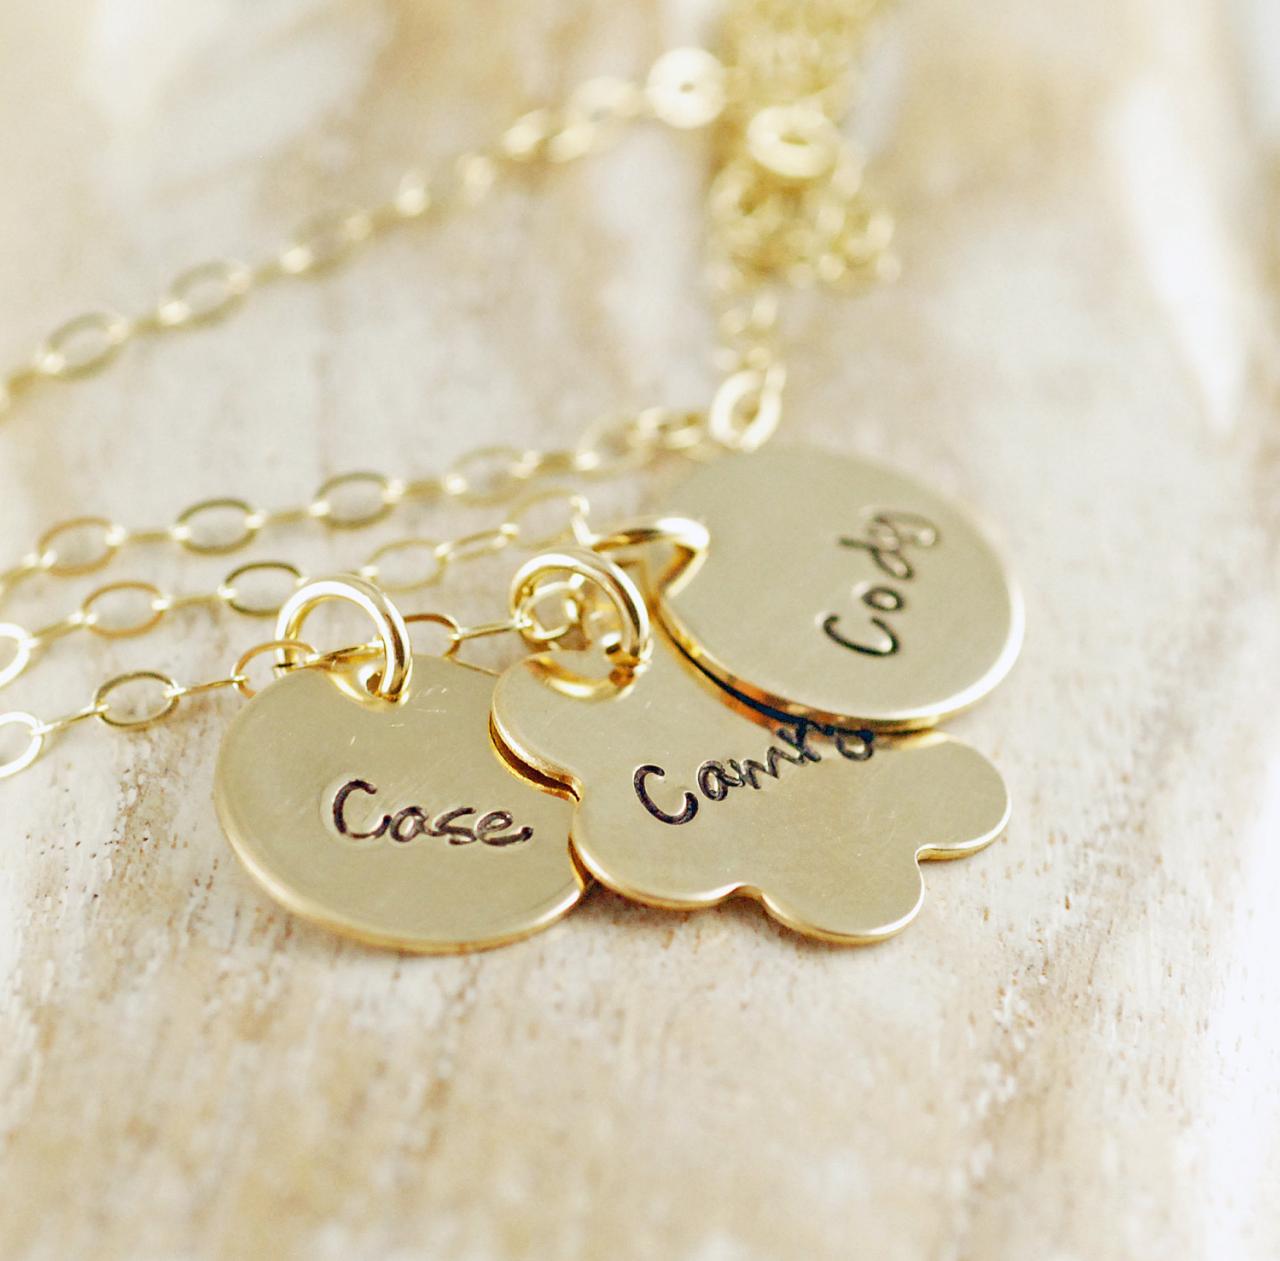 Hand Stamped Jewelry - Hand Stamped Necklace - Family Jewelry -personalized Mom Necklace - Gold Discs With Childrens Names - Mothers Jewelry